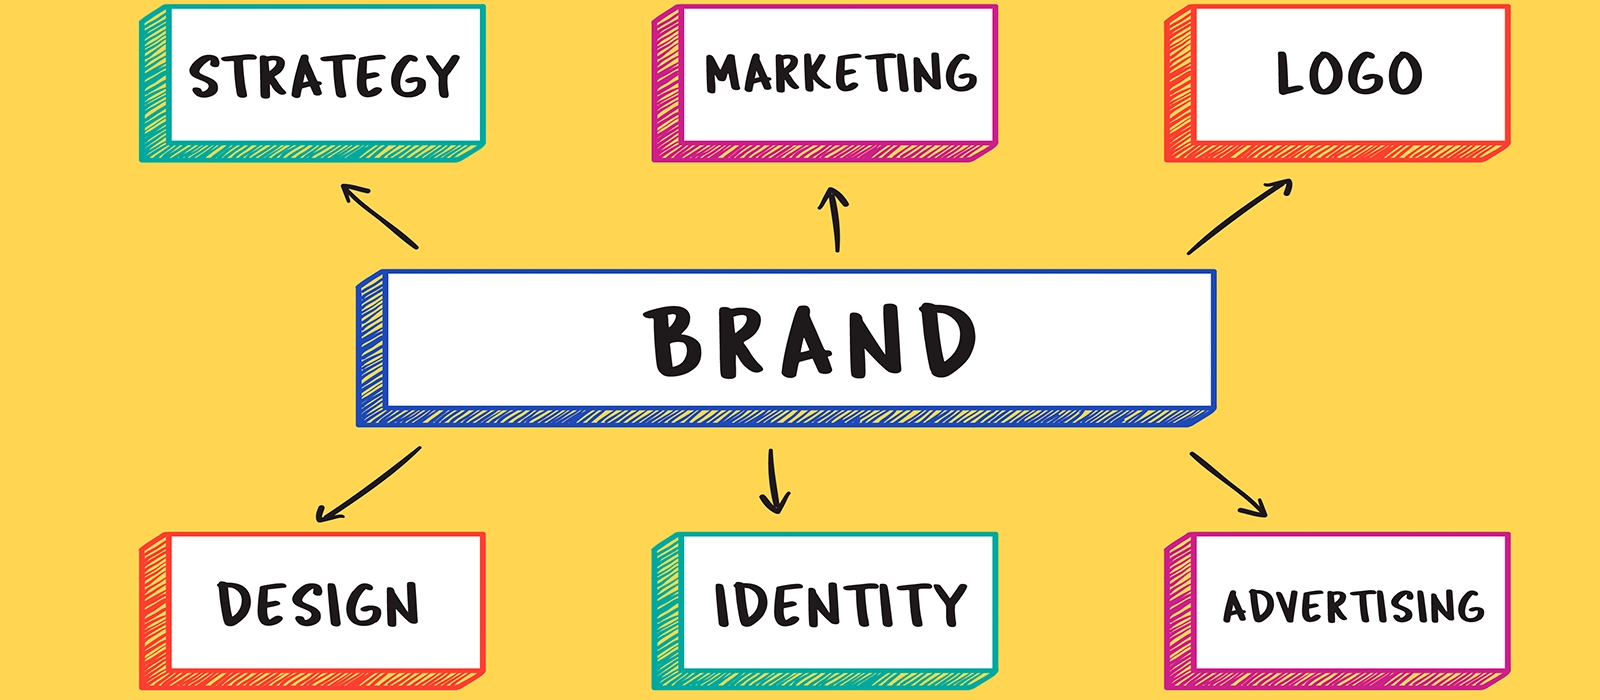 Mastering the Art of Online Branding: Your Ultimate Guide to Building Digital Authority